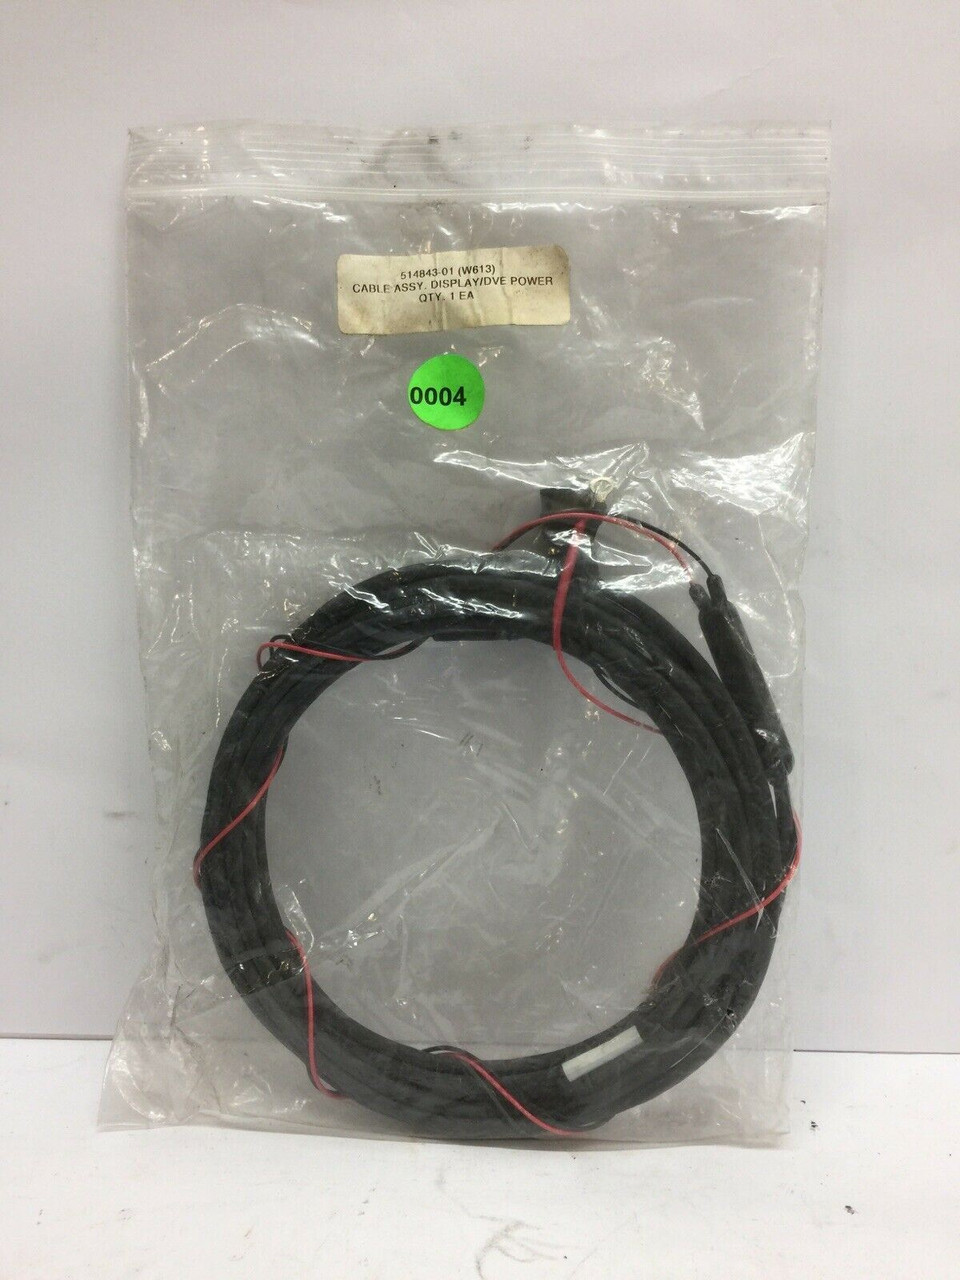 Display/DVE Power Cable Assembly 514843-01 (W613)